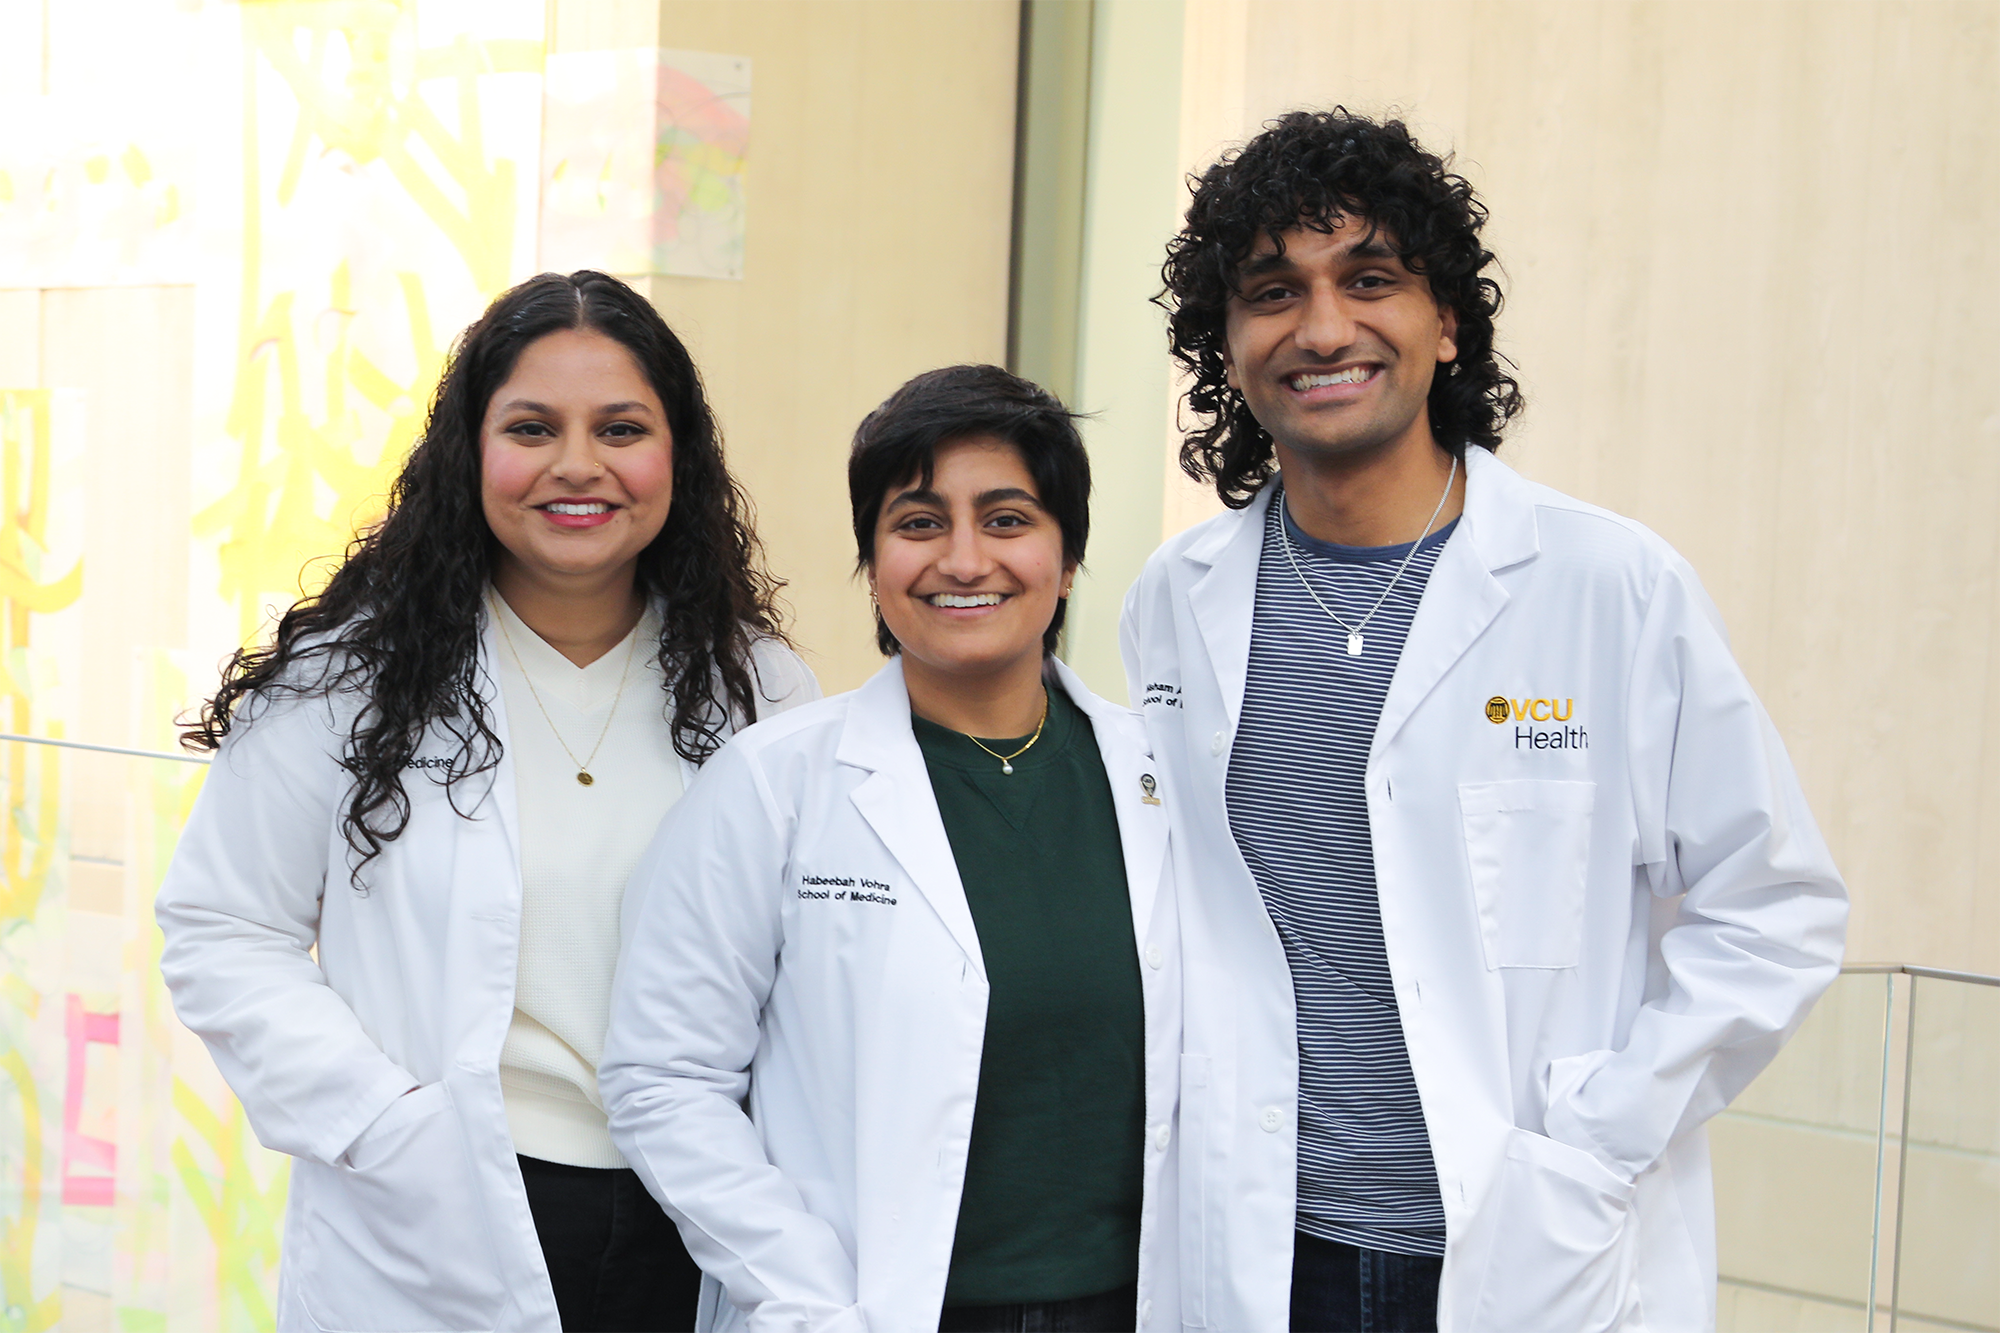 Hiba, Habeebah and Hisham Vohra (left to right), are all attending the School of Medicine at the same time. (Photo by Arda Athman, School of Medicine)